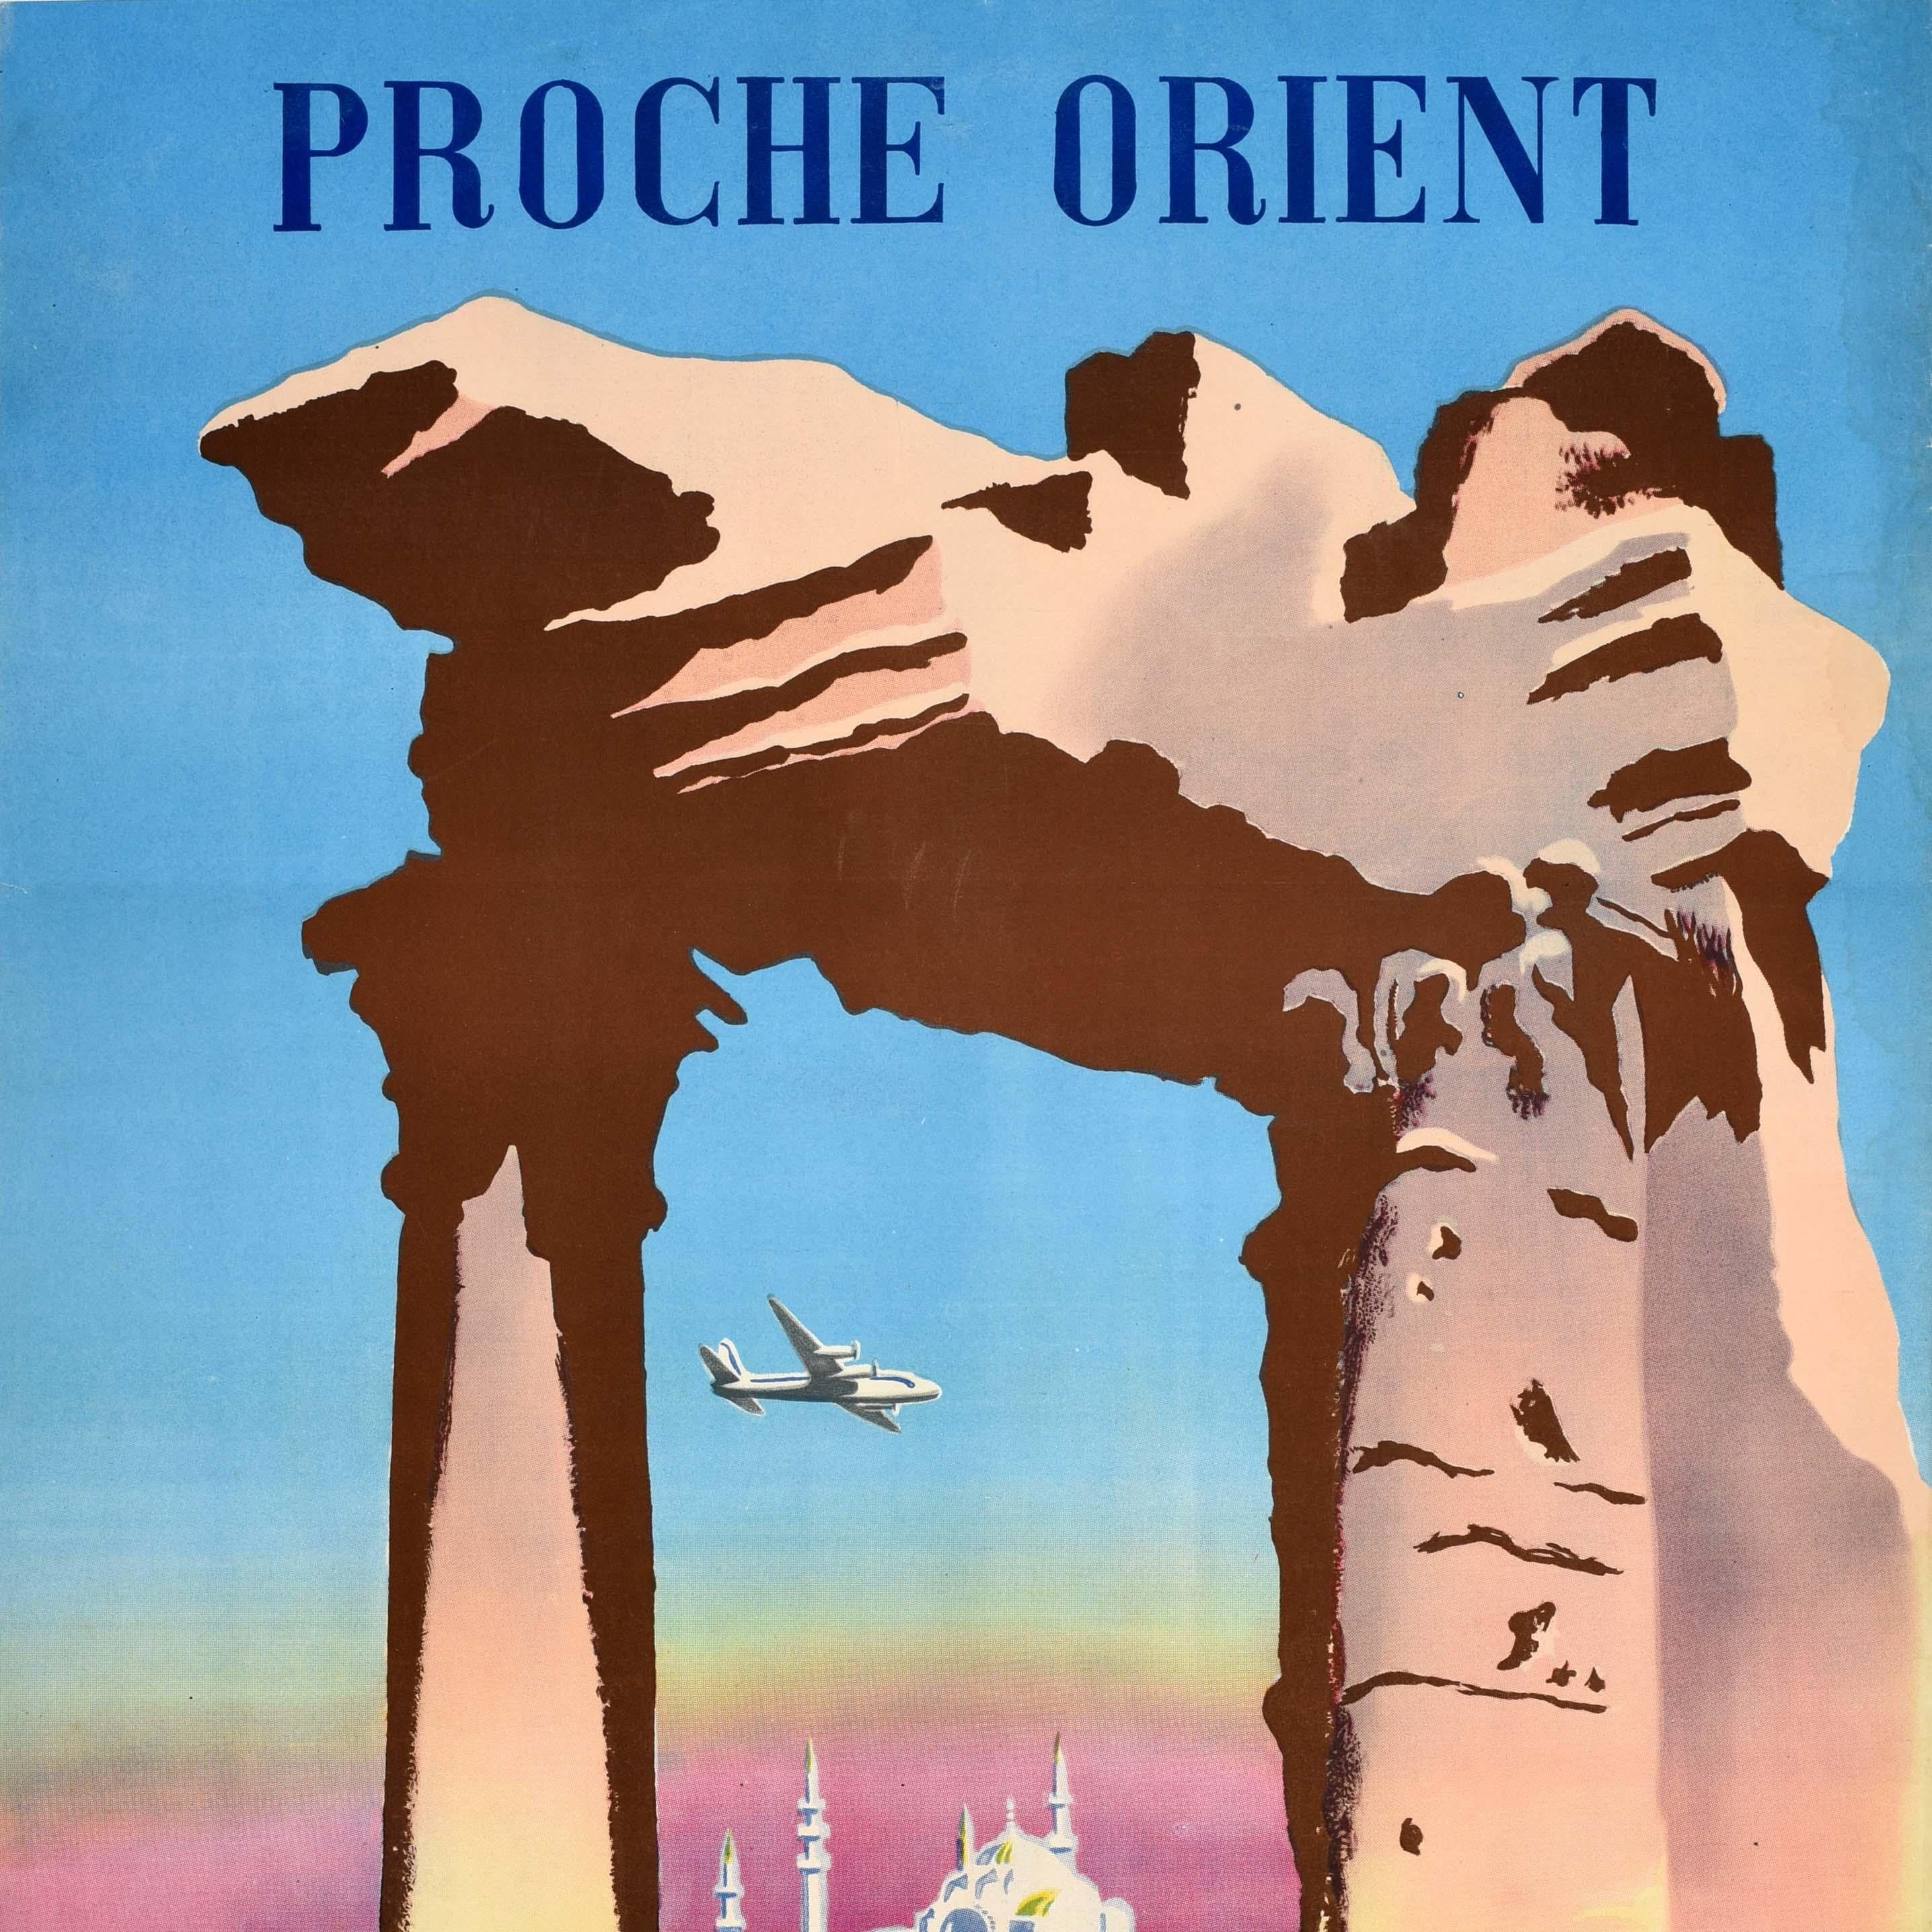 French Original Vintage Travel Poster Air France Middle East Proche Orient Jean Even For Sale